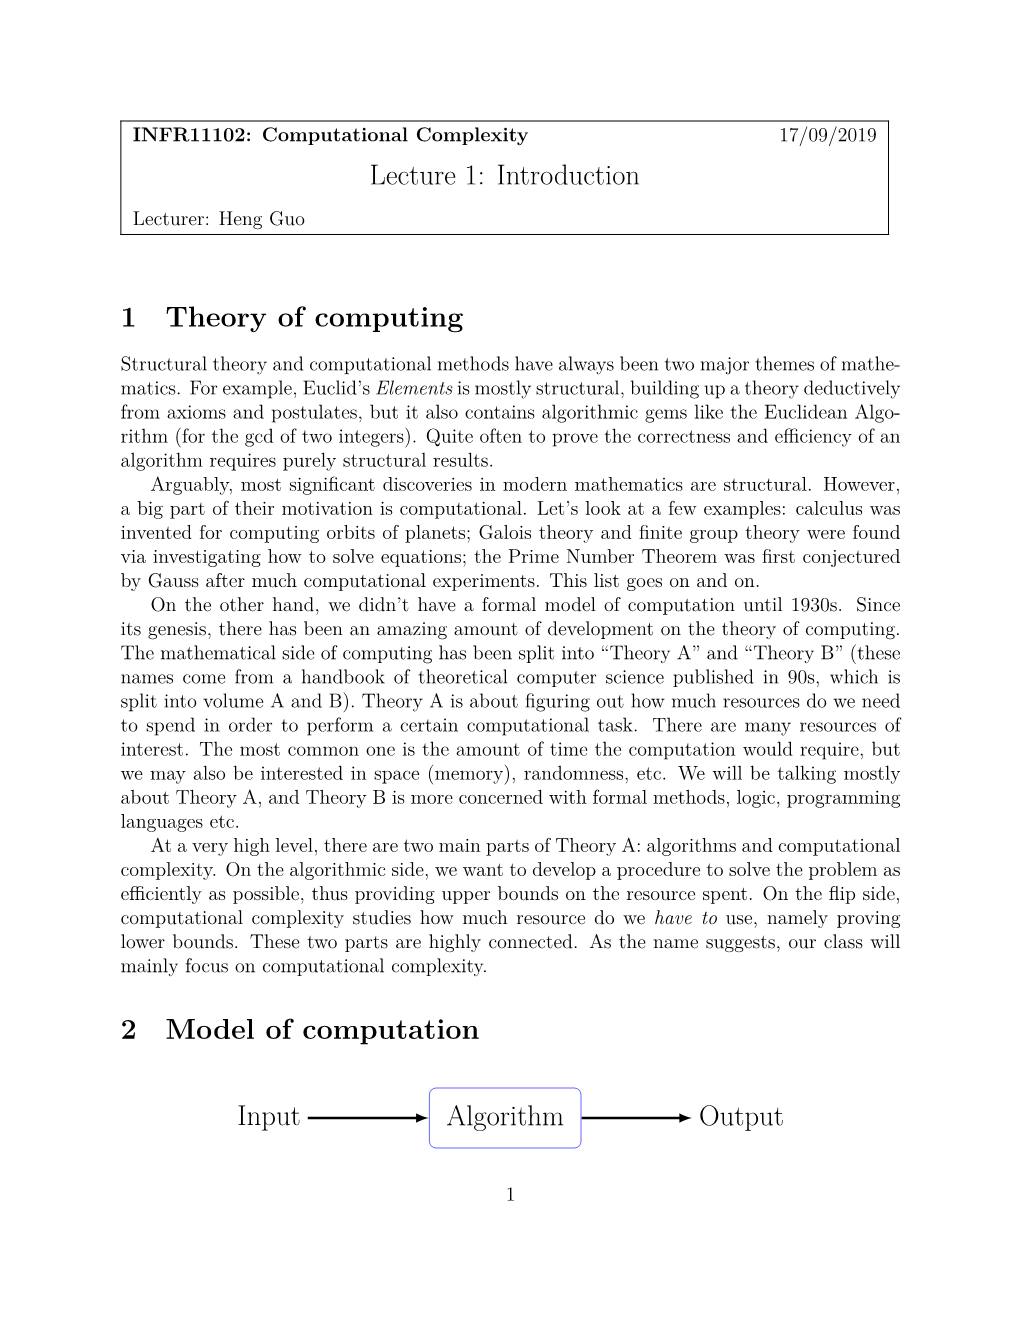 Lecture 1: Introduction 1 Theory of Computing 2 Model of Computation